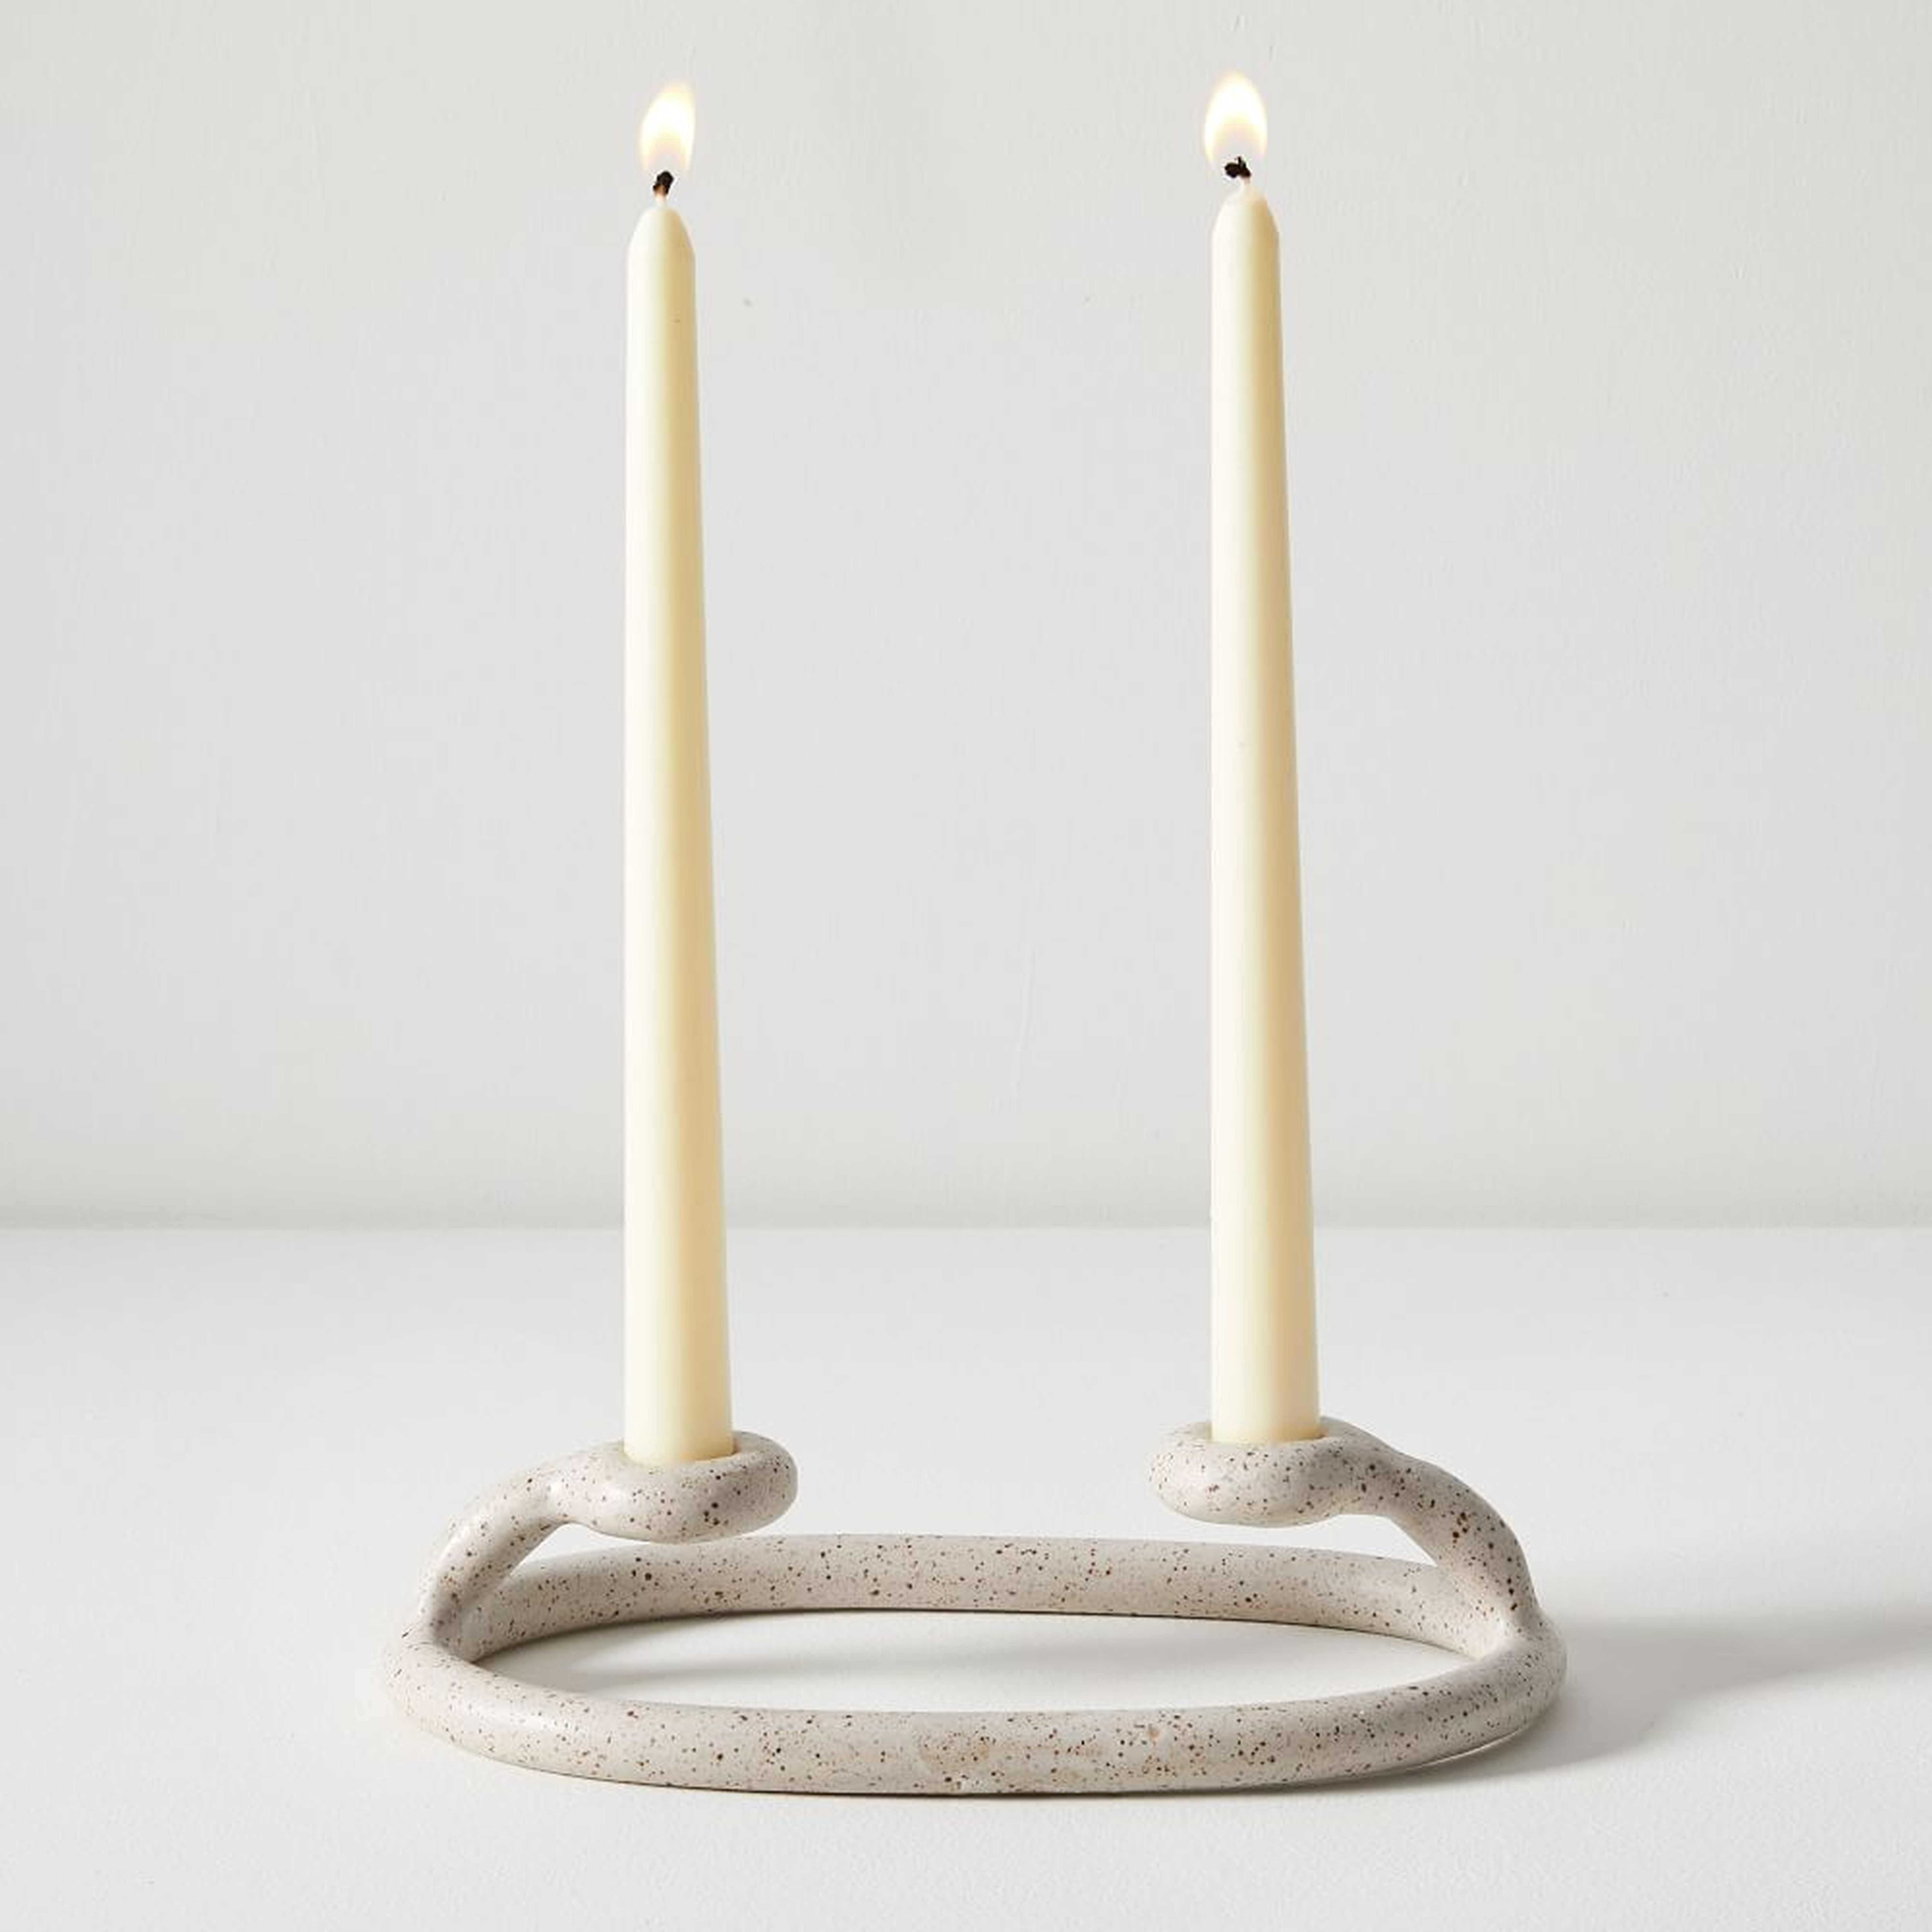 Virginia Sin Duo Candlestick Holder, Speckled White - West Elm